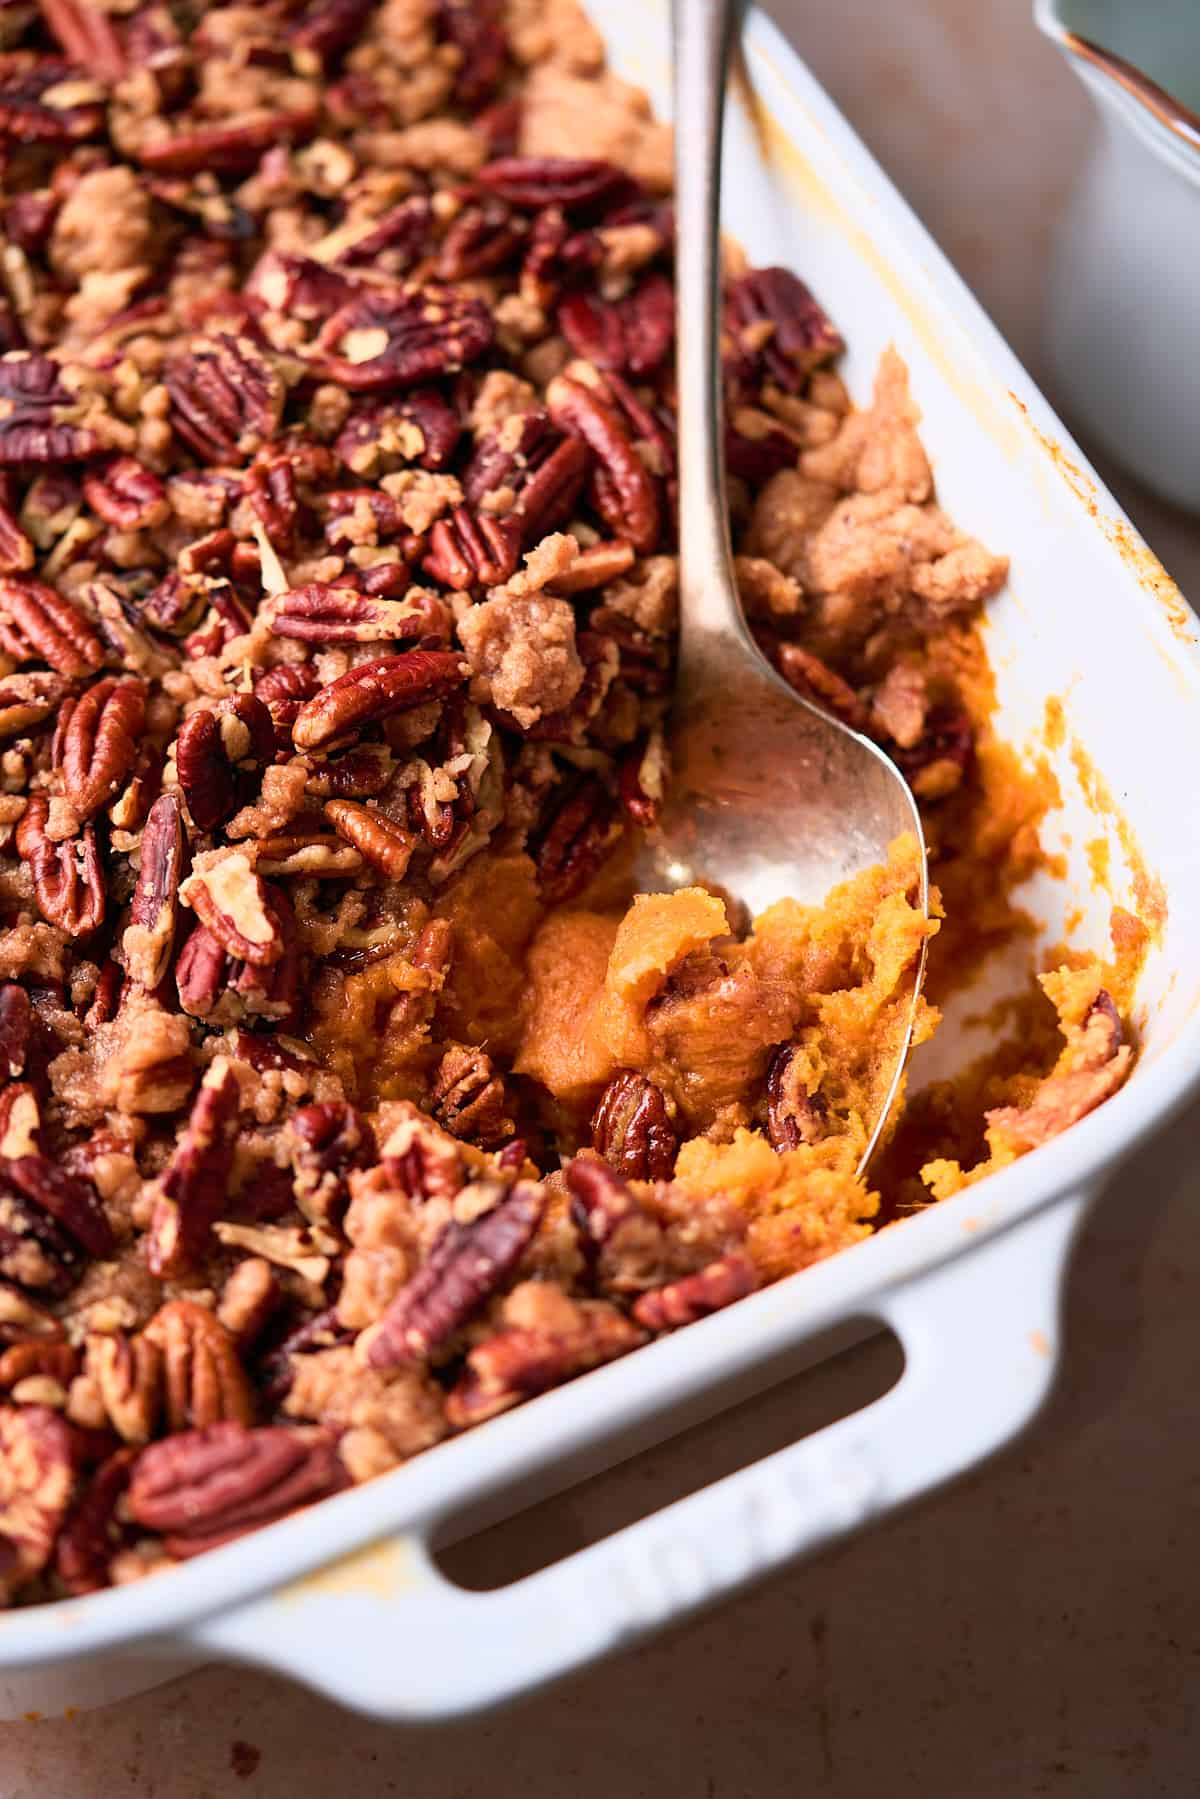 close up shot of sweet potato casserole in a large square baking dish with a spoon, showing the inside of the dish with a pecan topping.